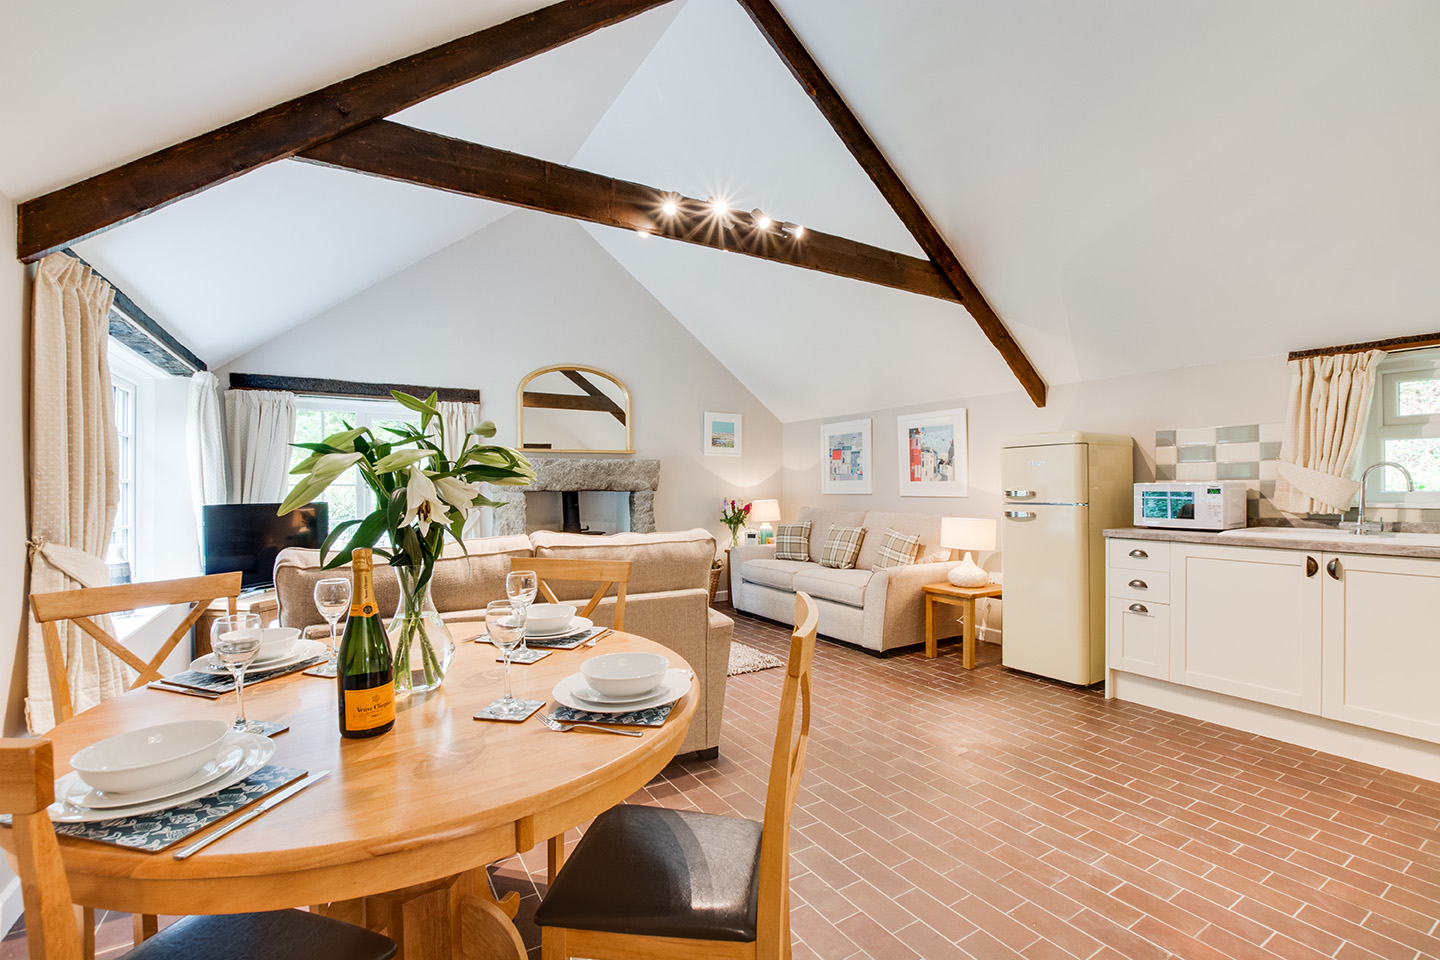 The dining area of Troutstream luxury self catering converted barn holiday cottage at Penrose Burden in North Cornwall 01.jpg